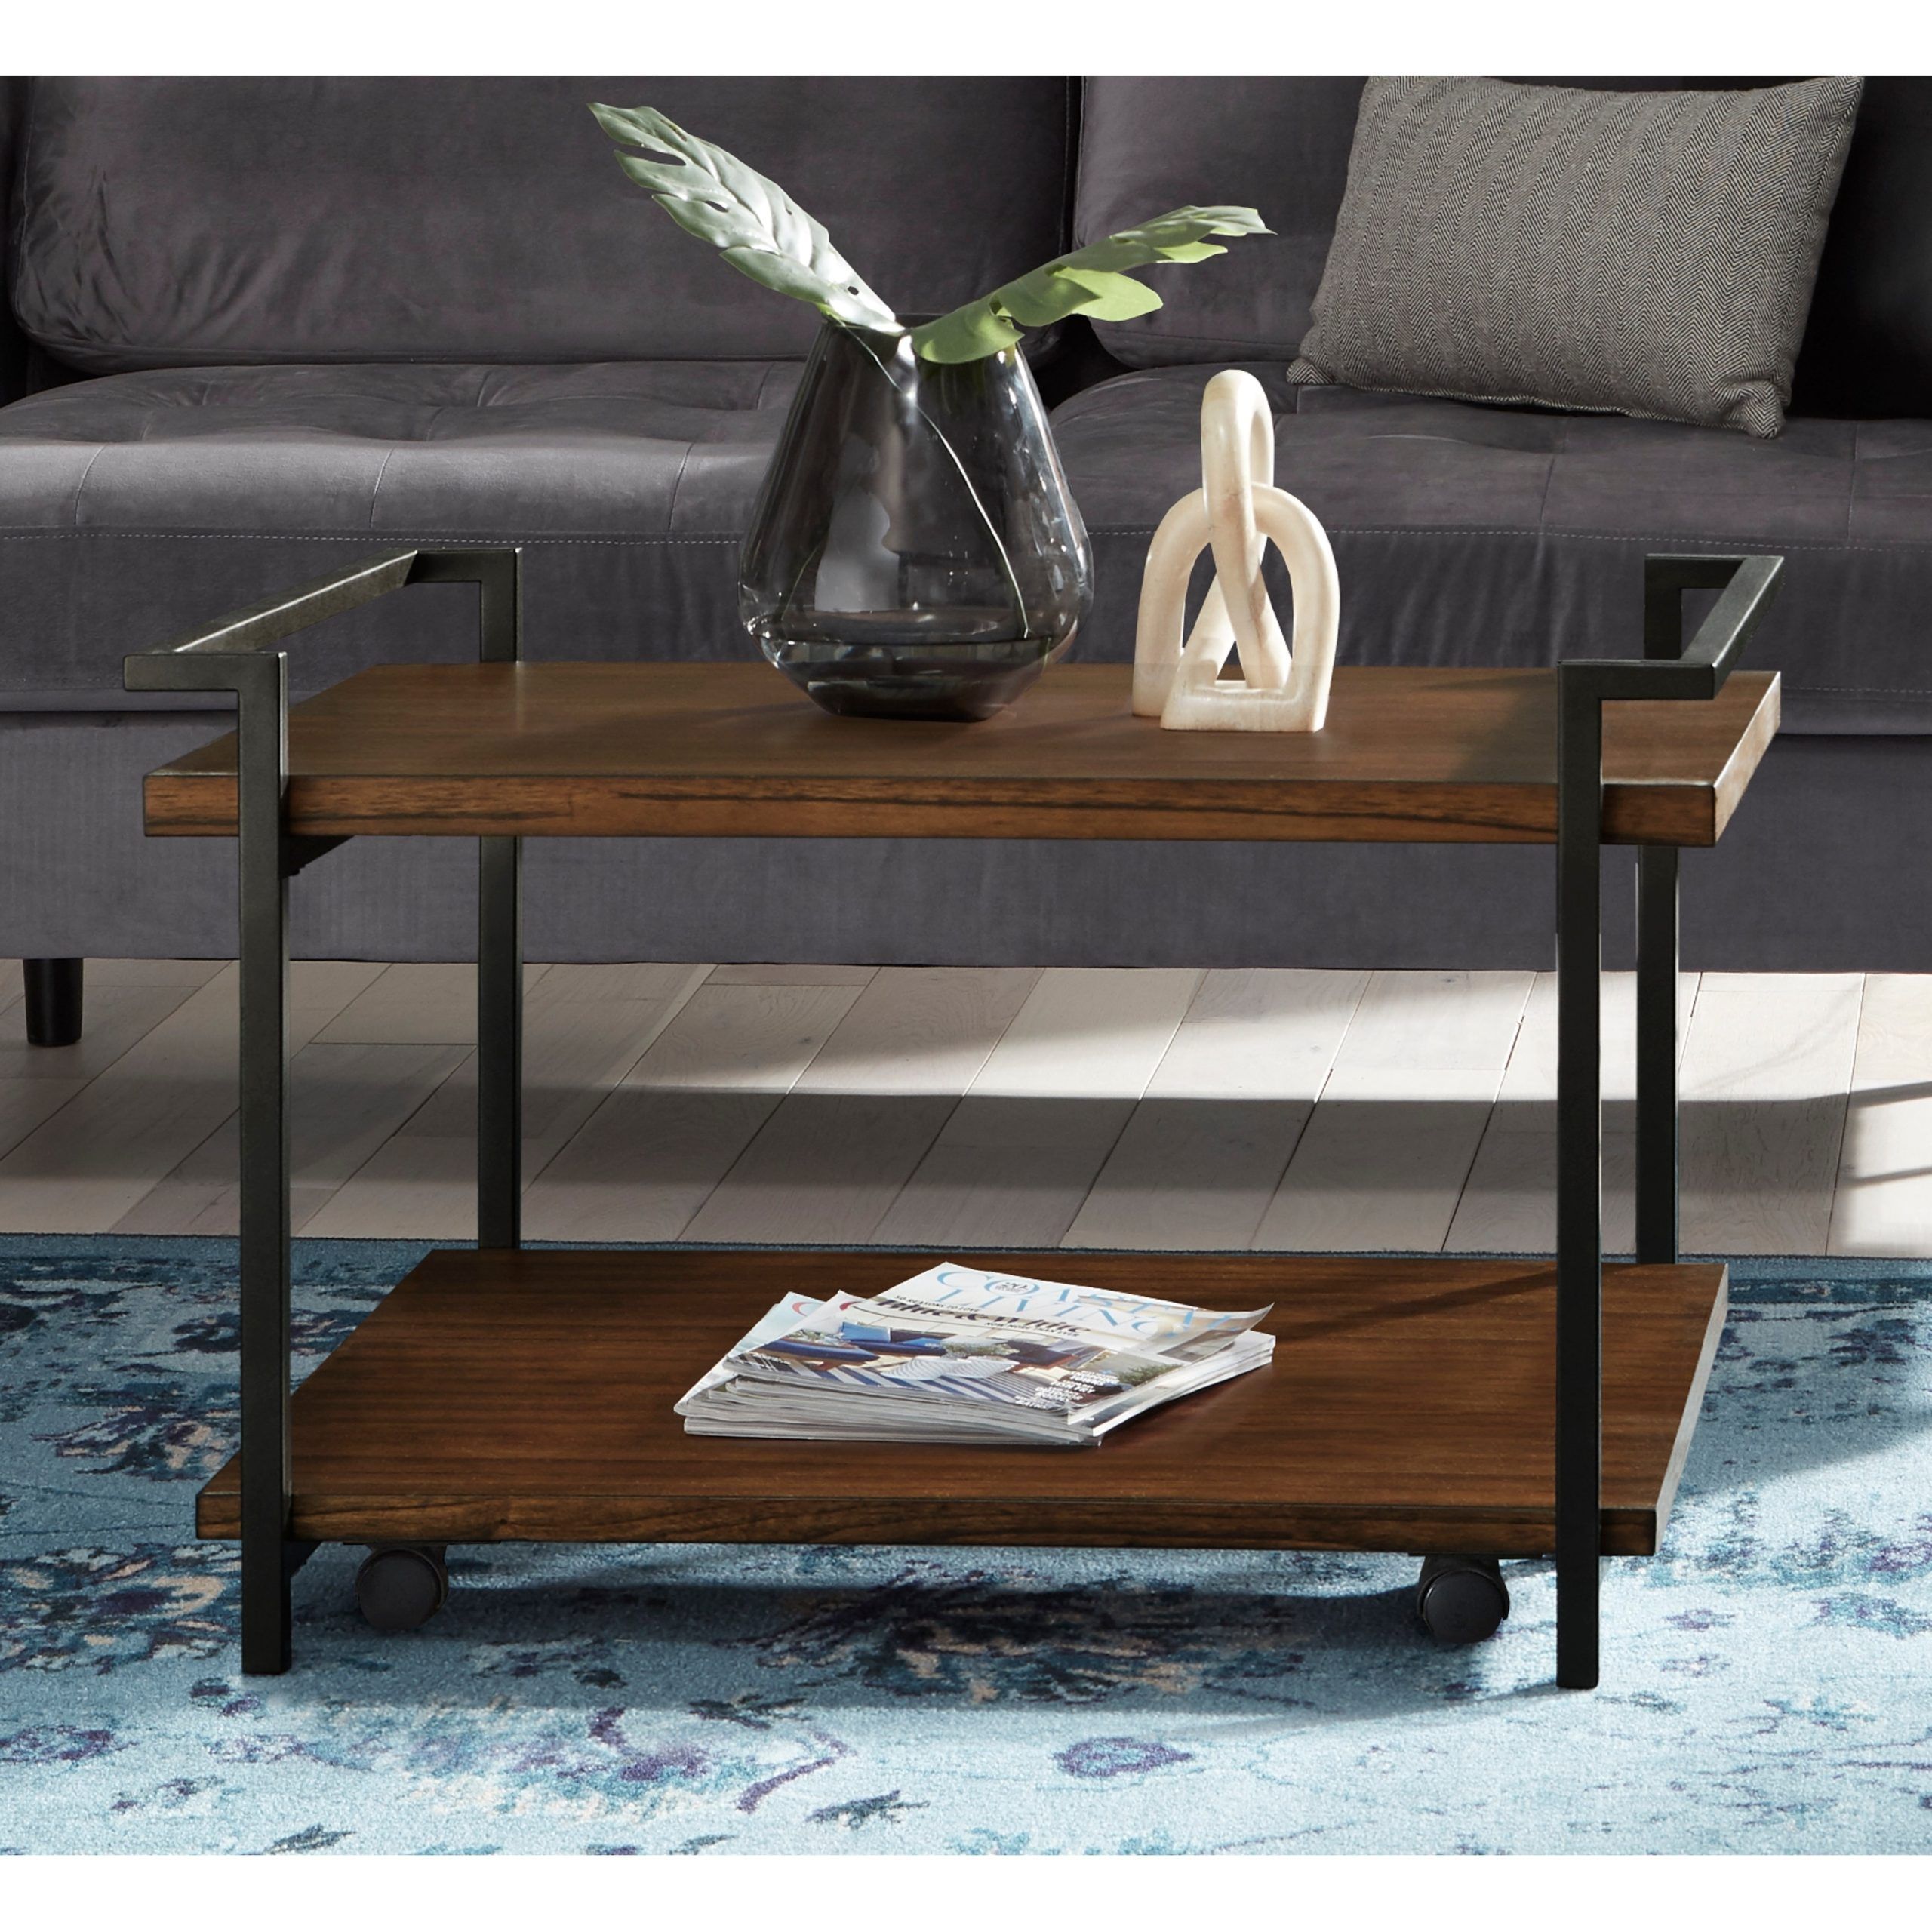 Natural Solid Wood And Metal Coffee Table With Shelves – Bed Bath & Beyond  – 32046820 Regarding Coffee Tables With Casters (View 14 of 15)